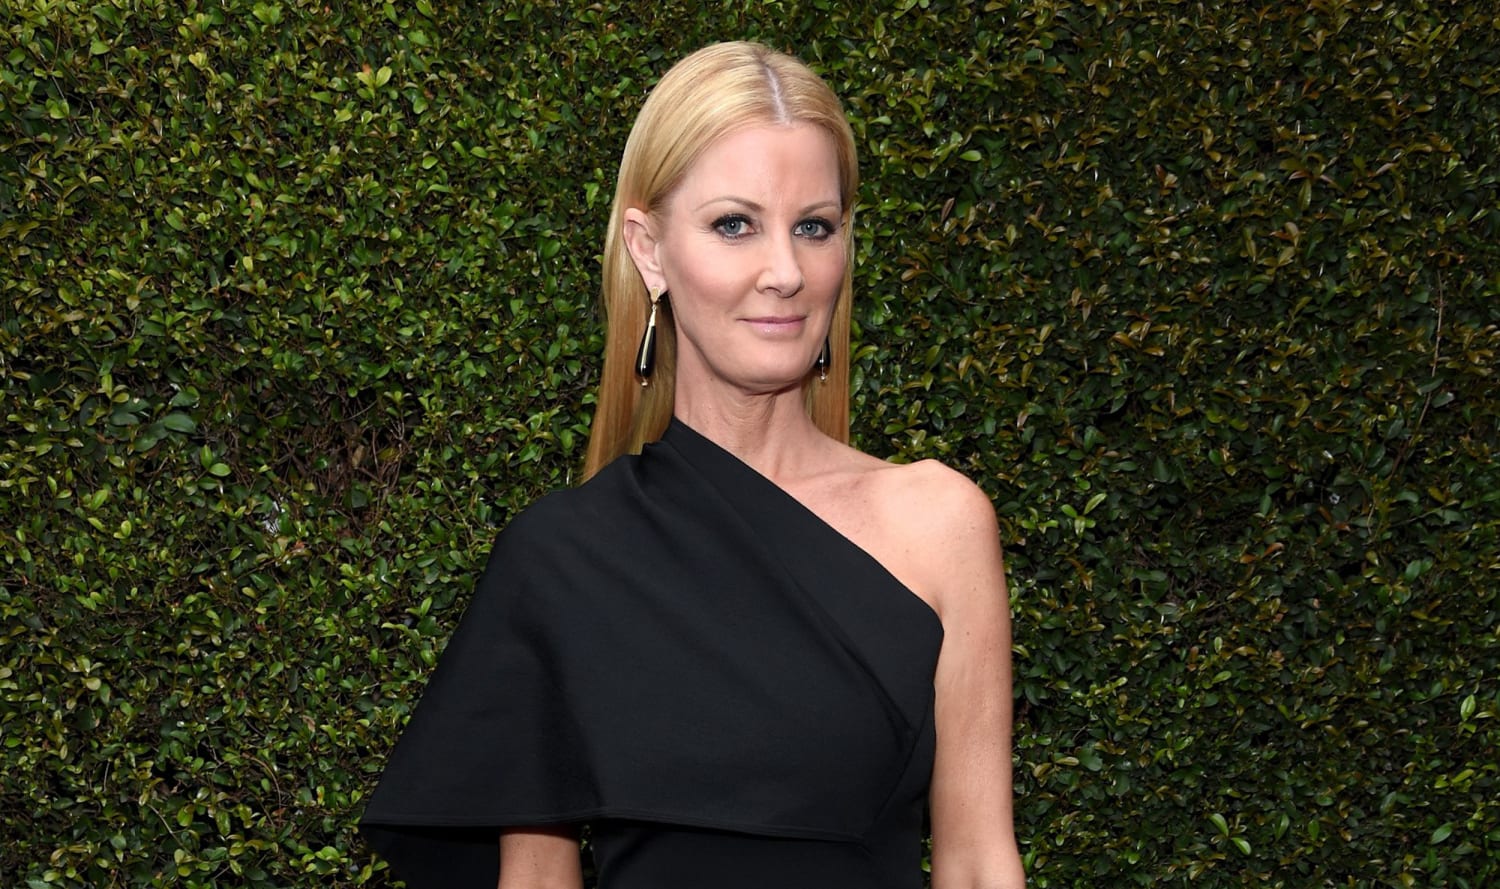 Sandra Lee shares update 3 days after hysterectomy, infection